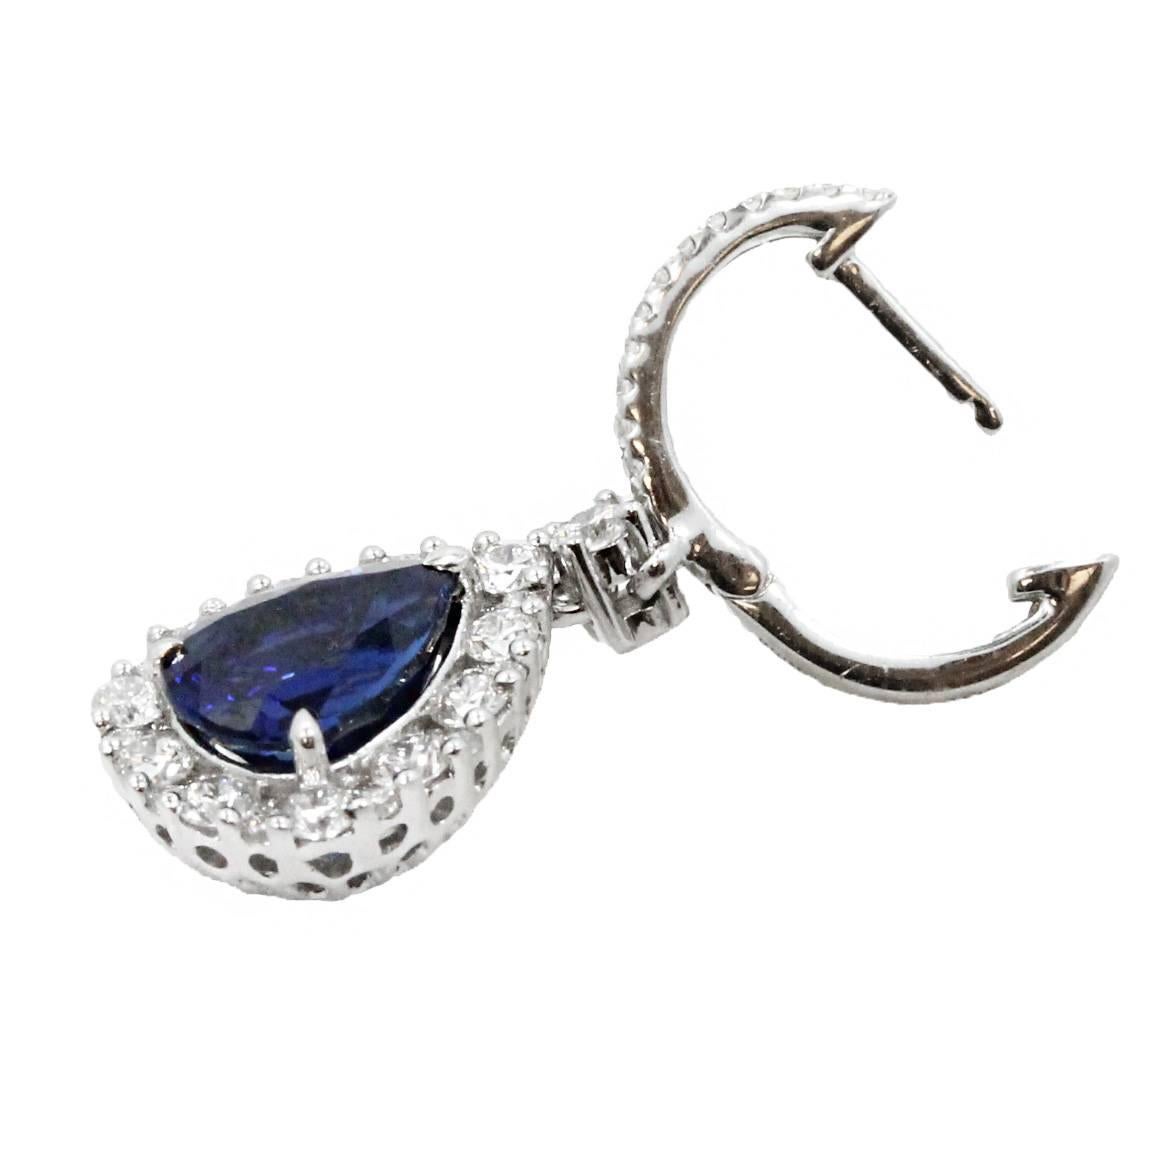 18K White Gold Gregg Ruth Drop Earrings With Center Blue Sapphire Stone Weighing a Total Carat Weight of 4.76ct and Surrounding Diamonds With a Total Carat Weight of 1.46ct.